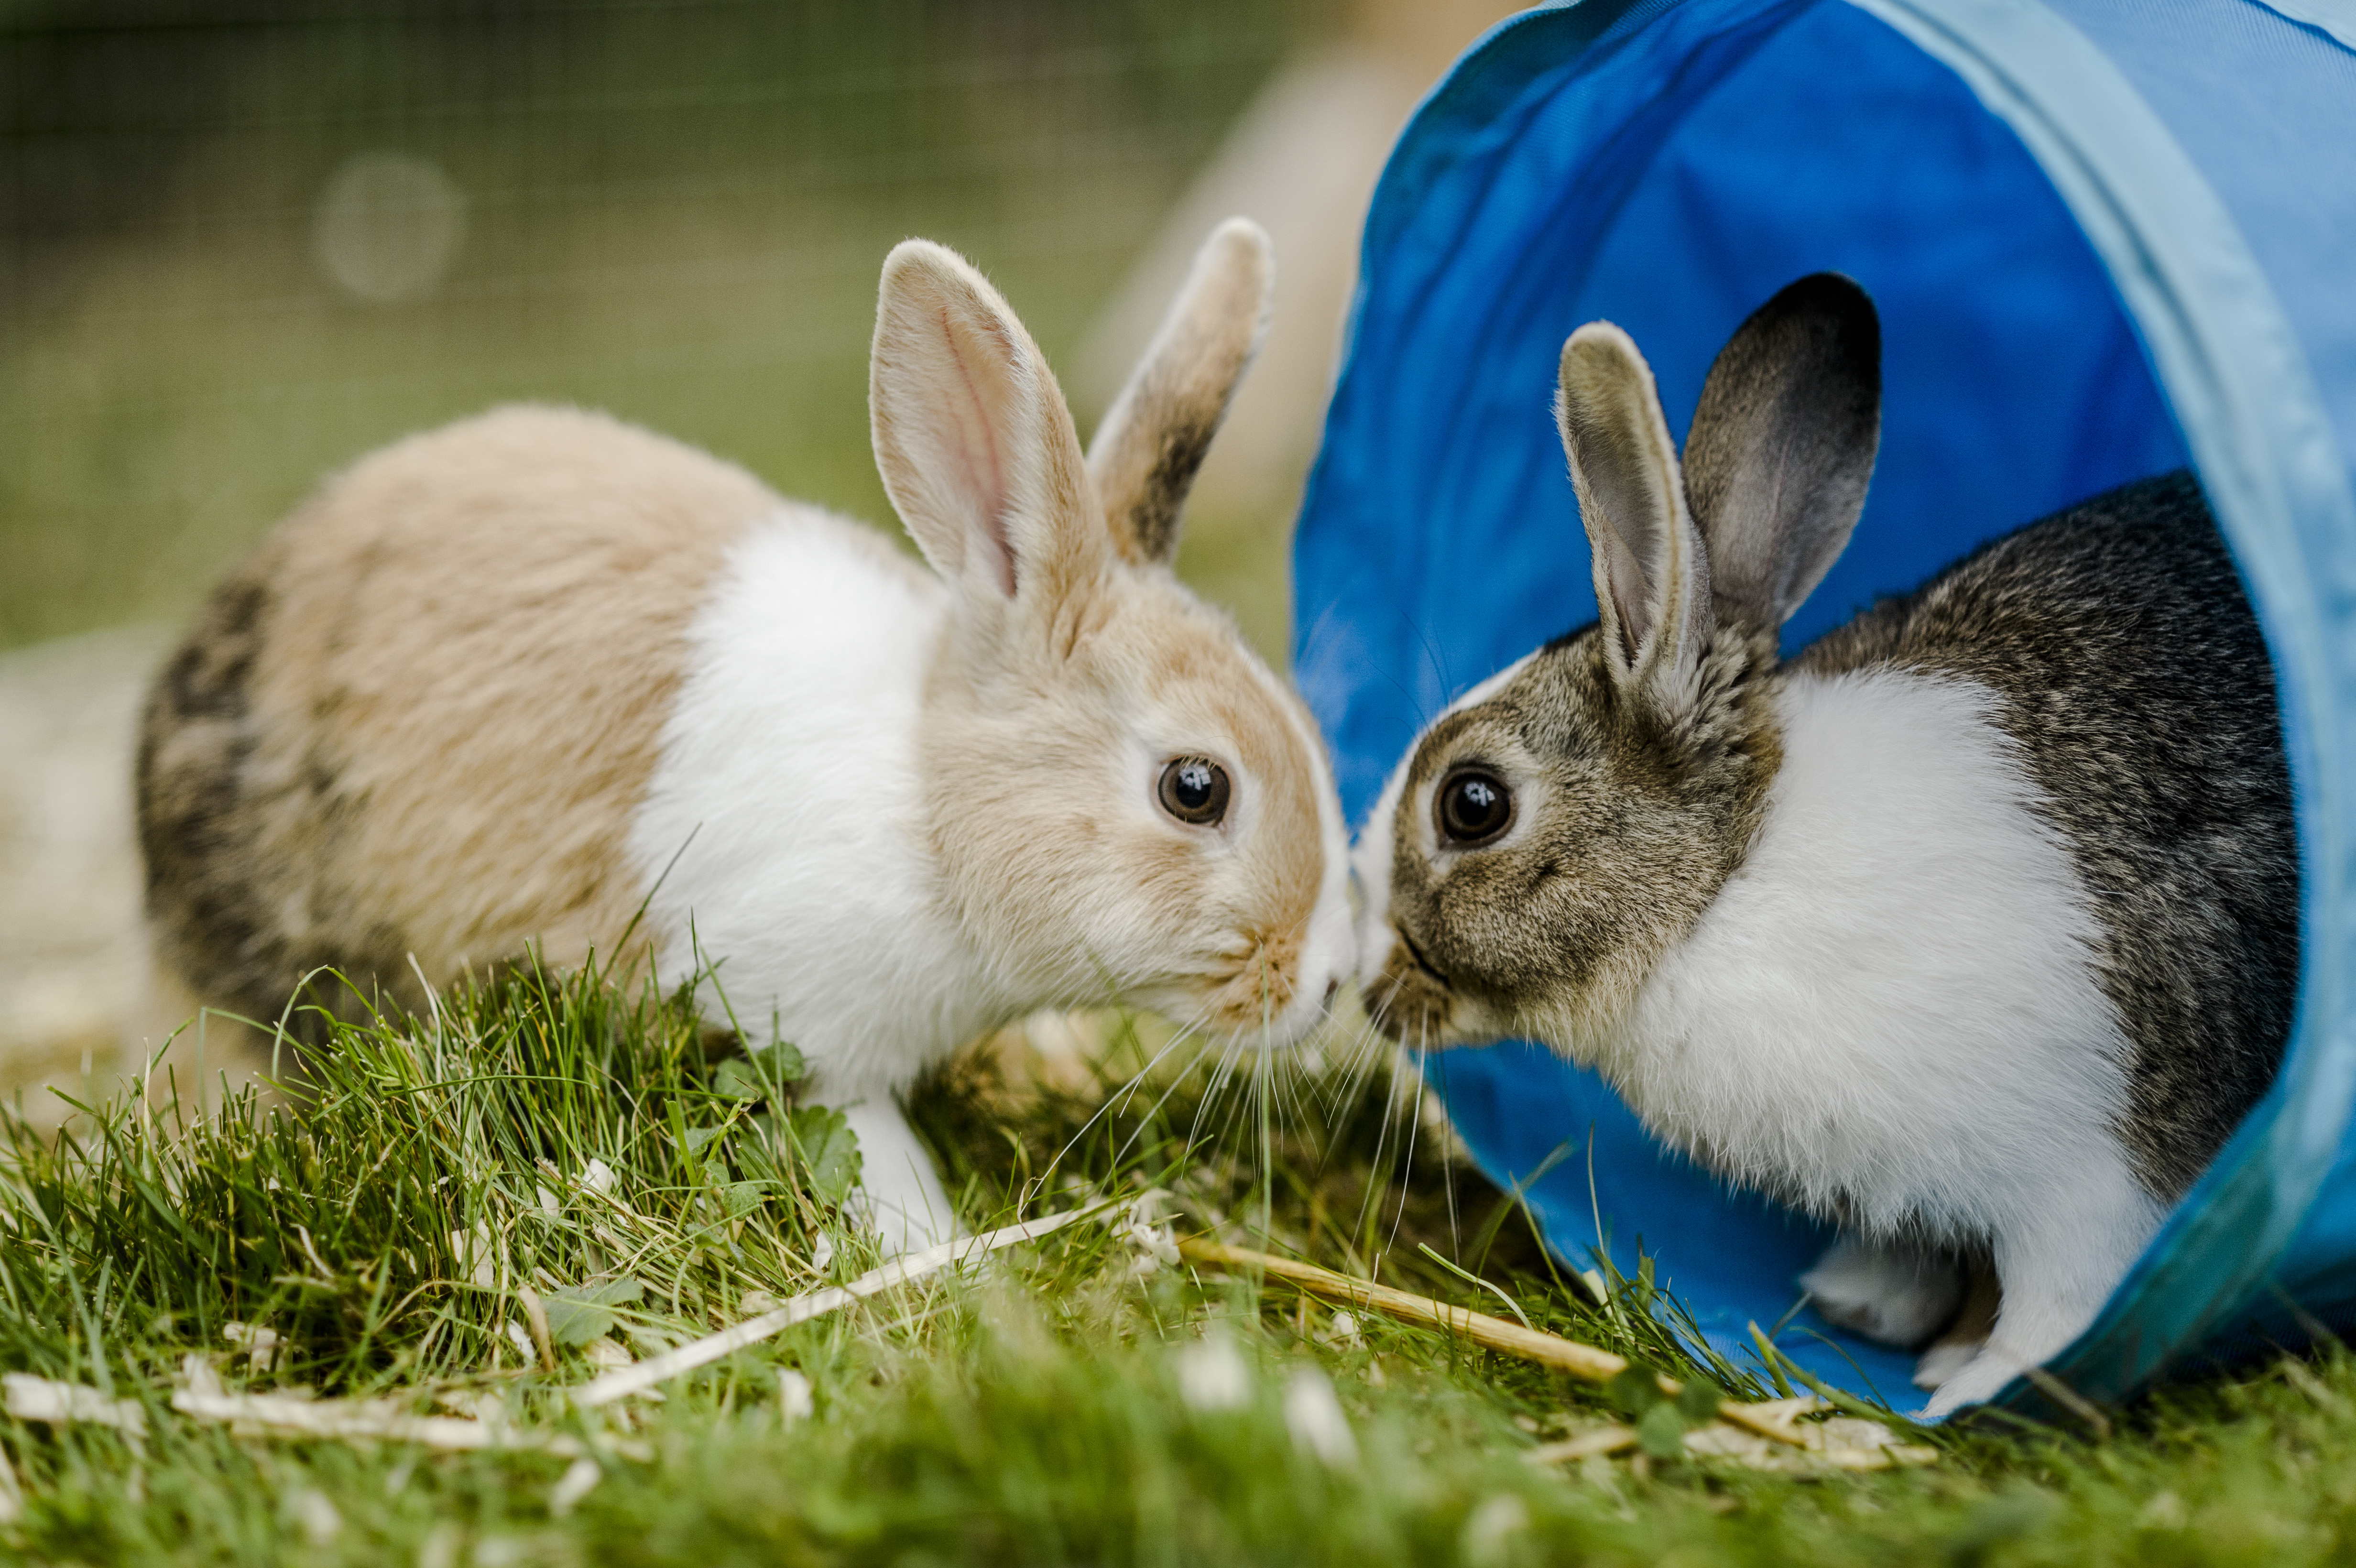 Two brown and white rabbits in a blue tunnel on a grassy garden 